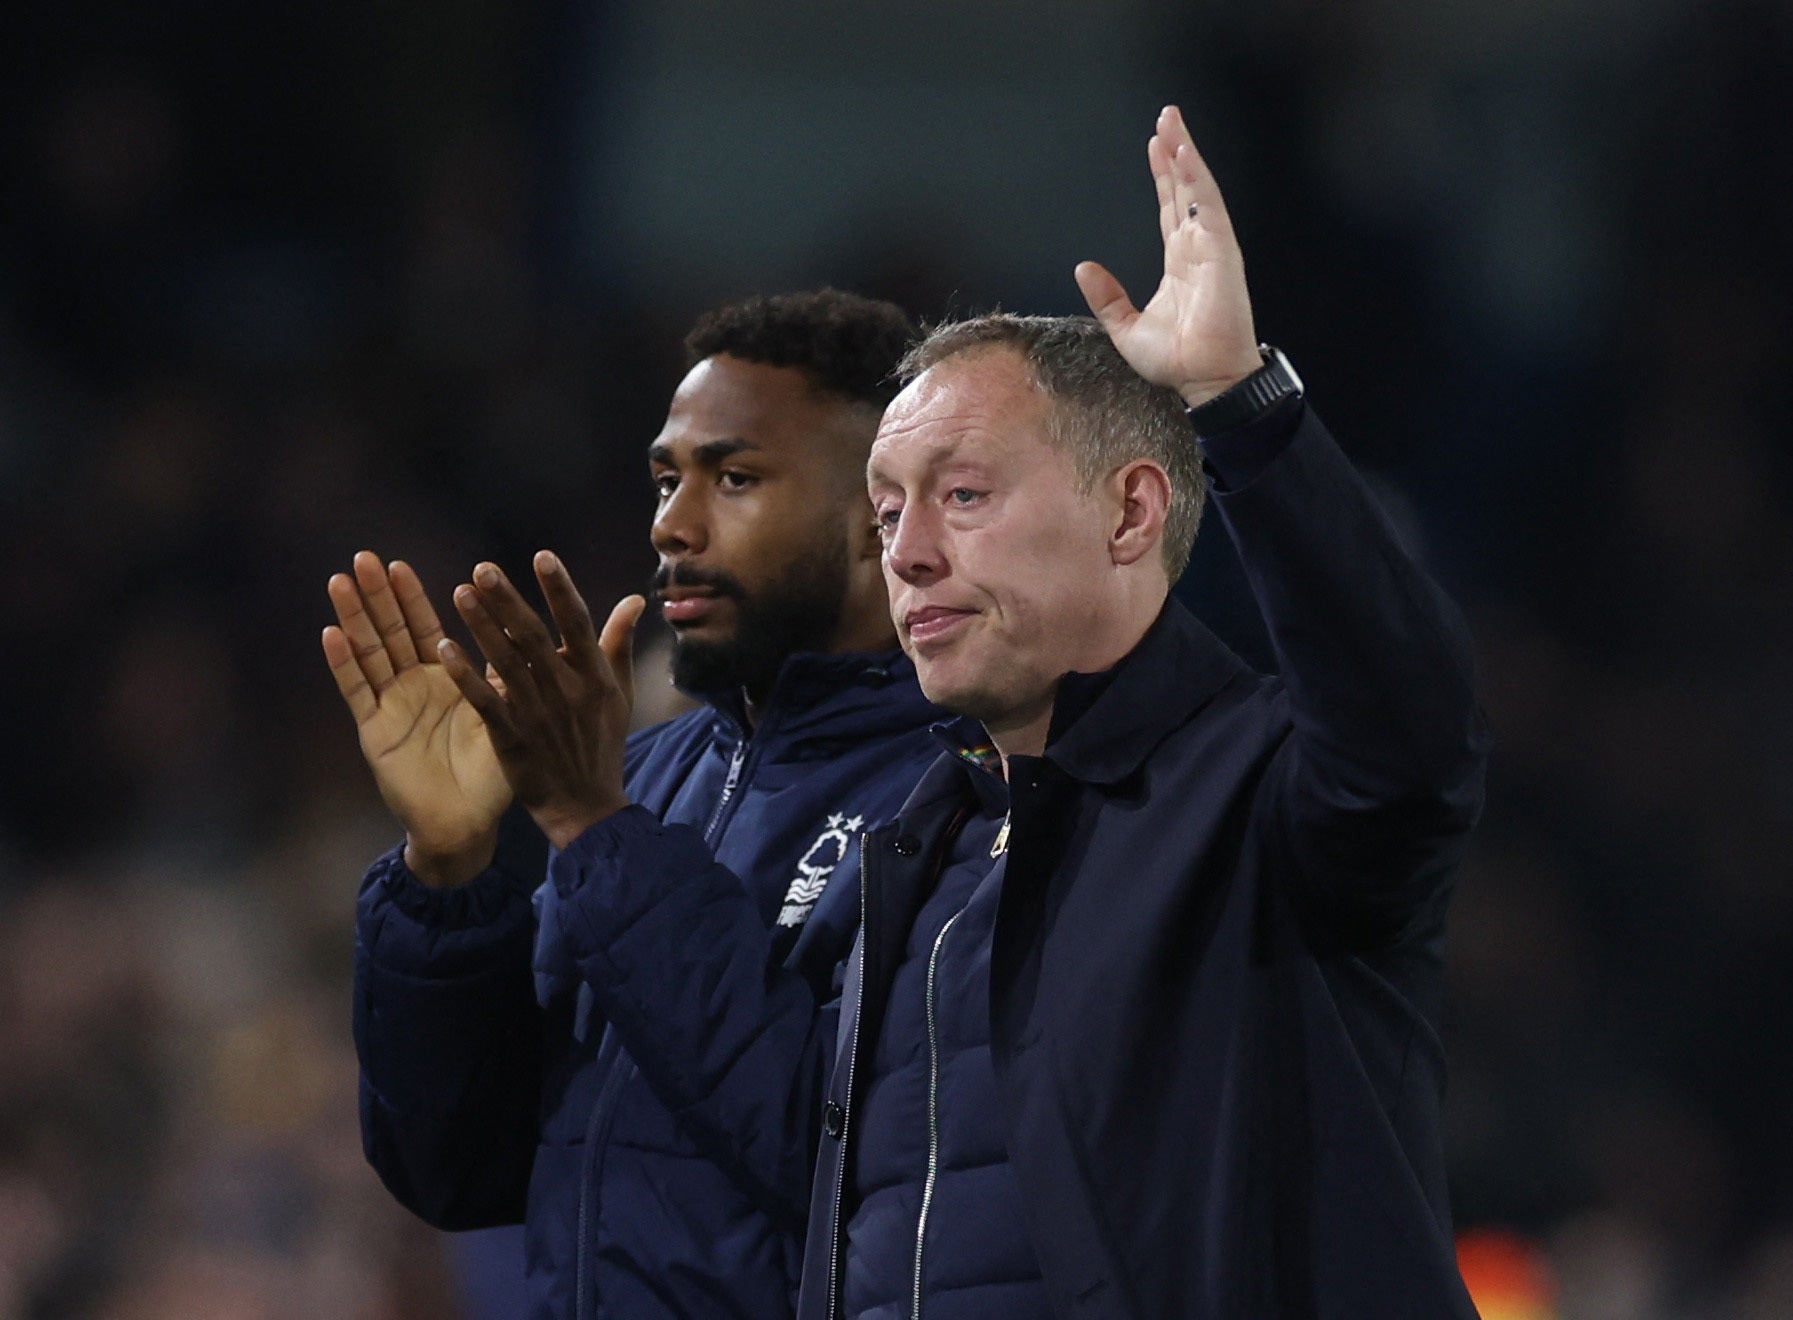 Steve Cooper could be about to lose his job as Nottingham Forest manager, despite fan support